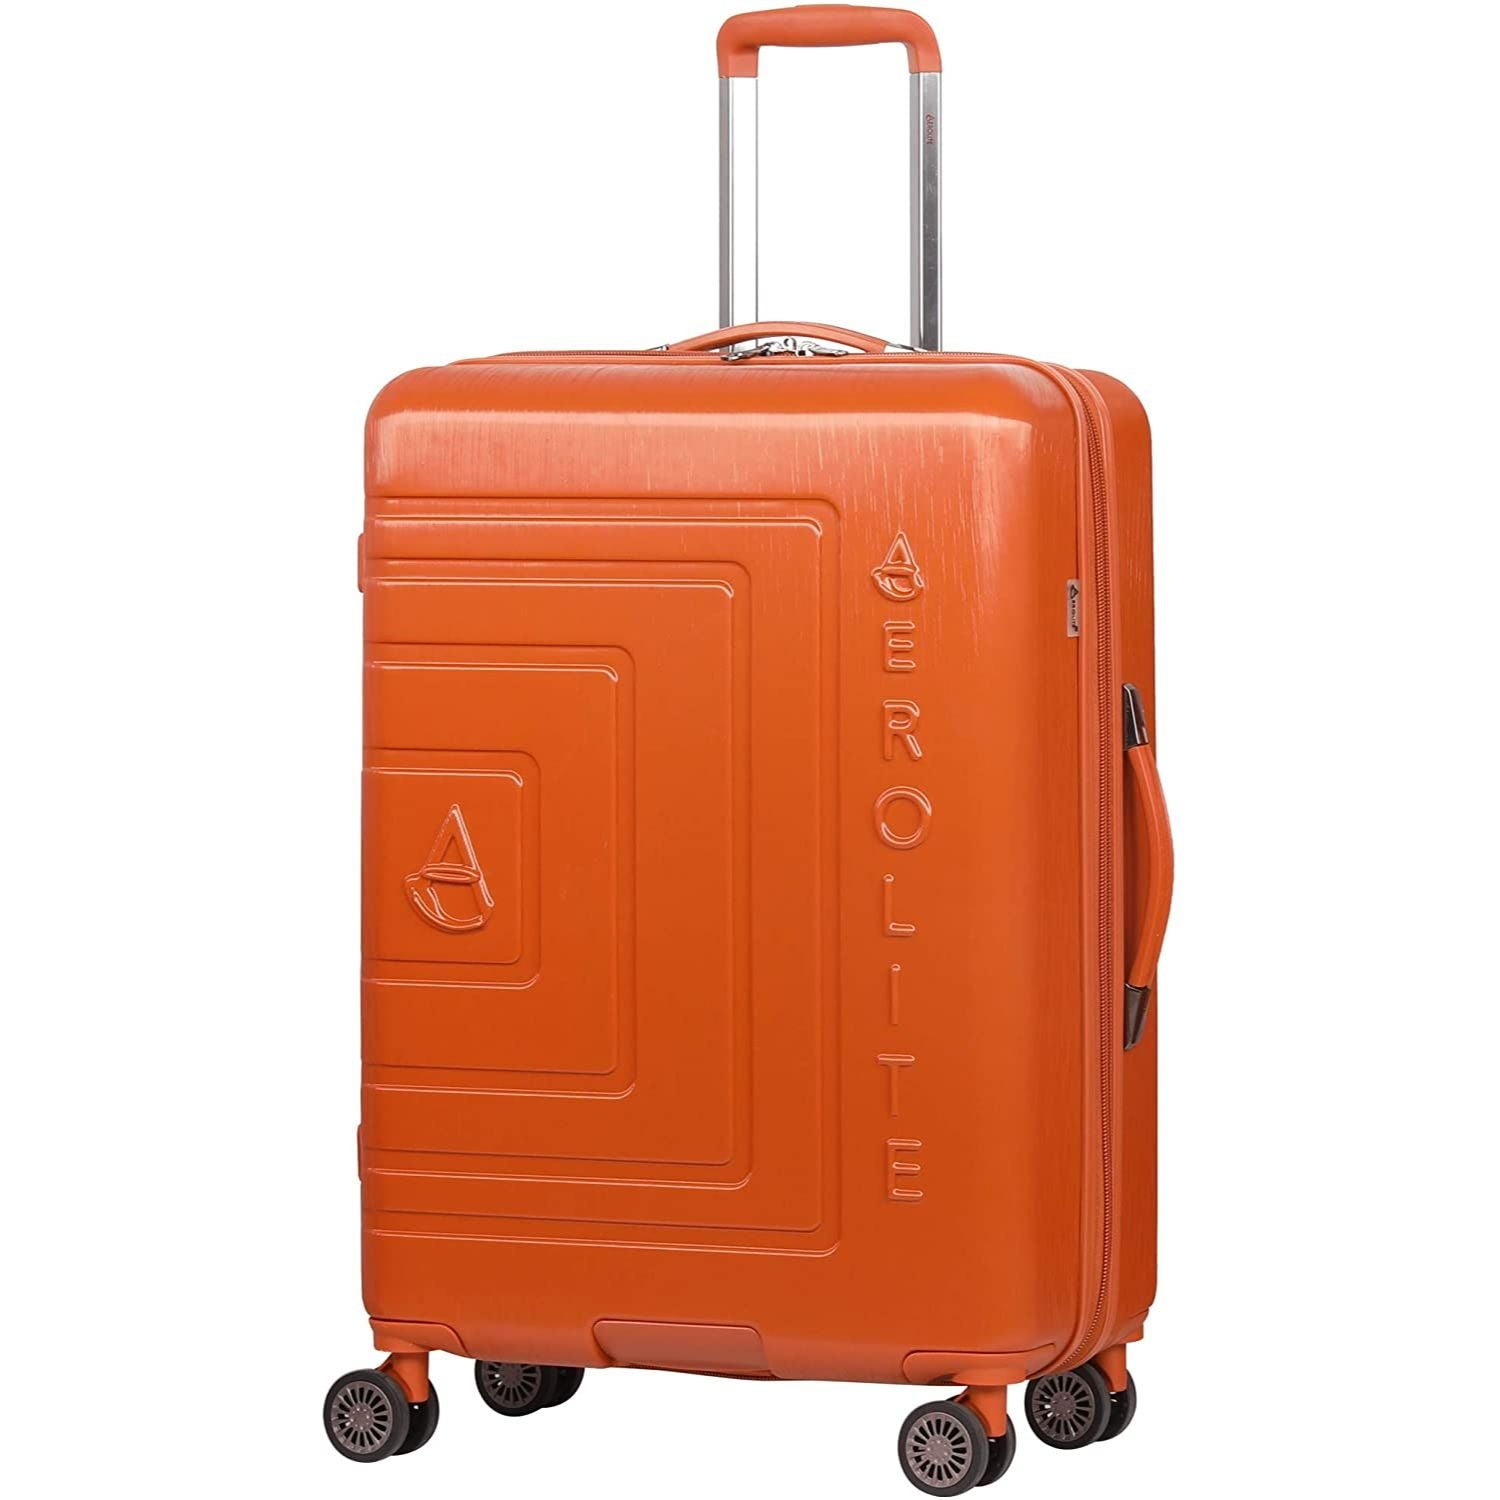 Aerolite Lightweight ABS Hard Shell 8 Wheel Complete Luggage Set (Cabin 21" + Medium 25" + Large 29"), Approved for Ryanair, easyJet, British Airways, Virgin Atlantic, Flybe and Many More